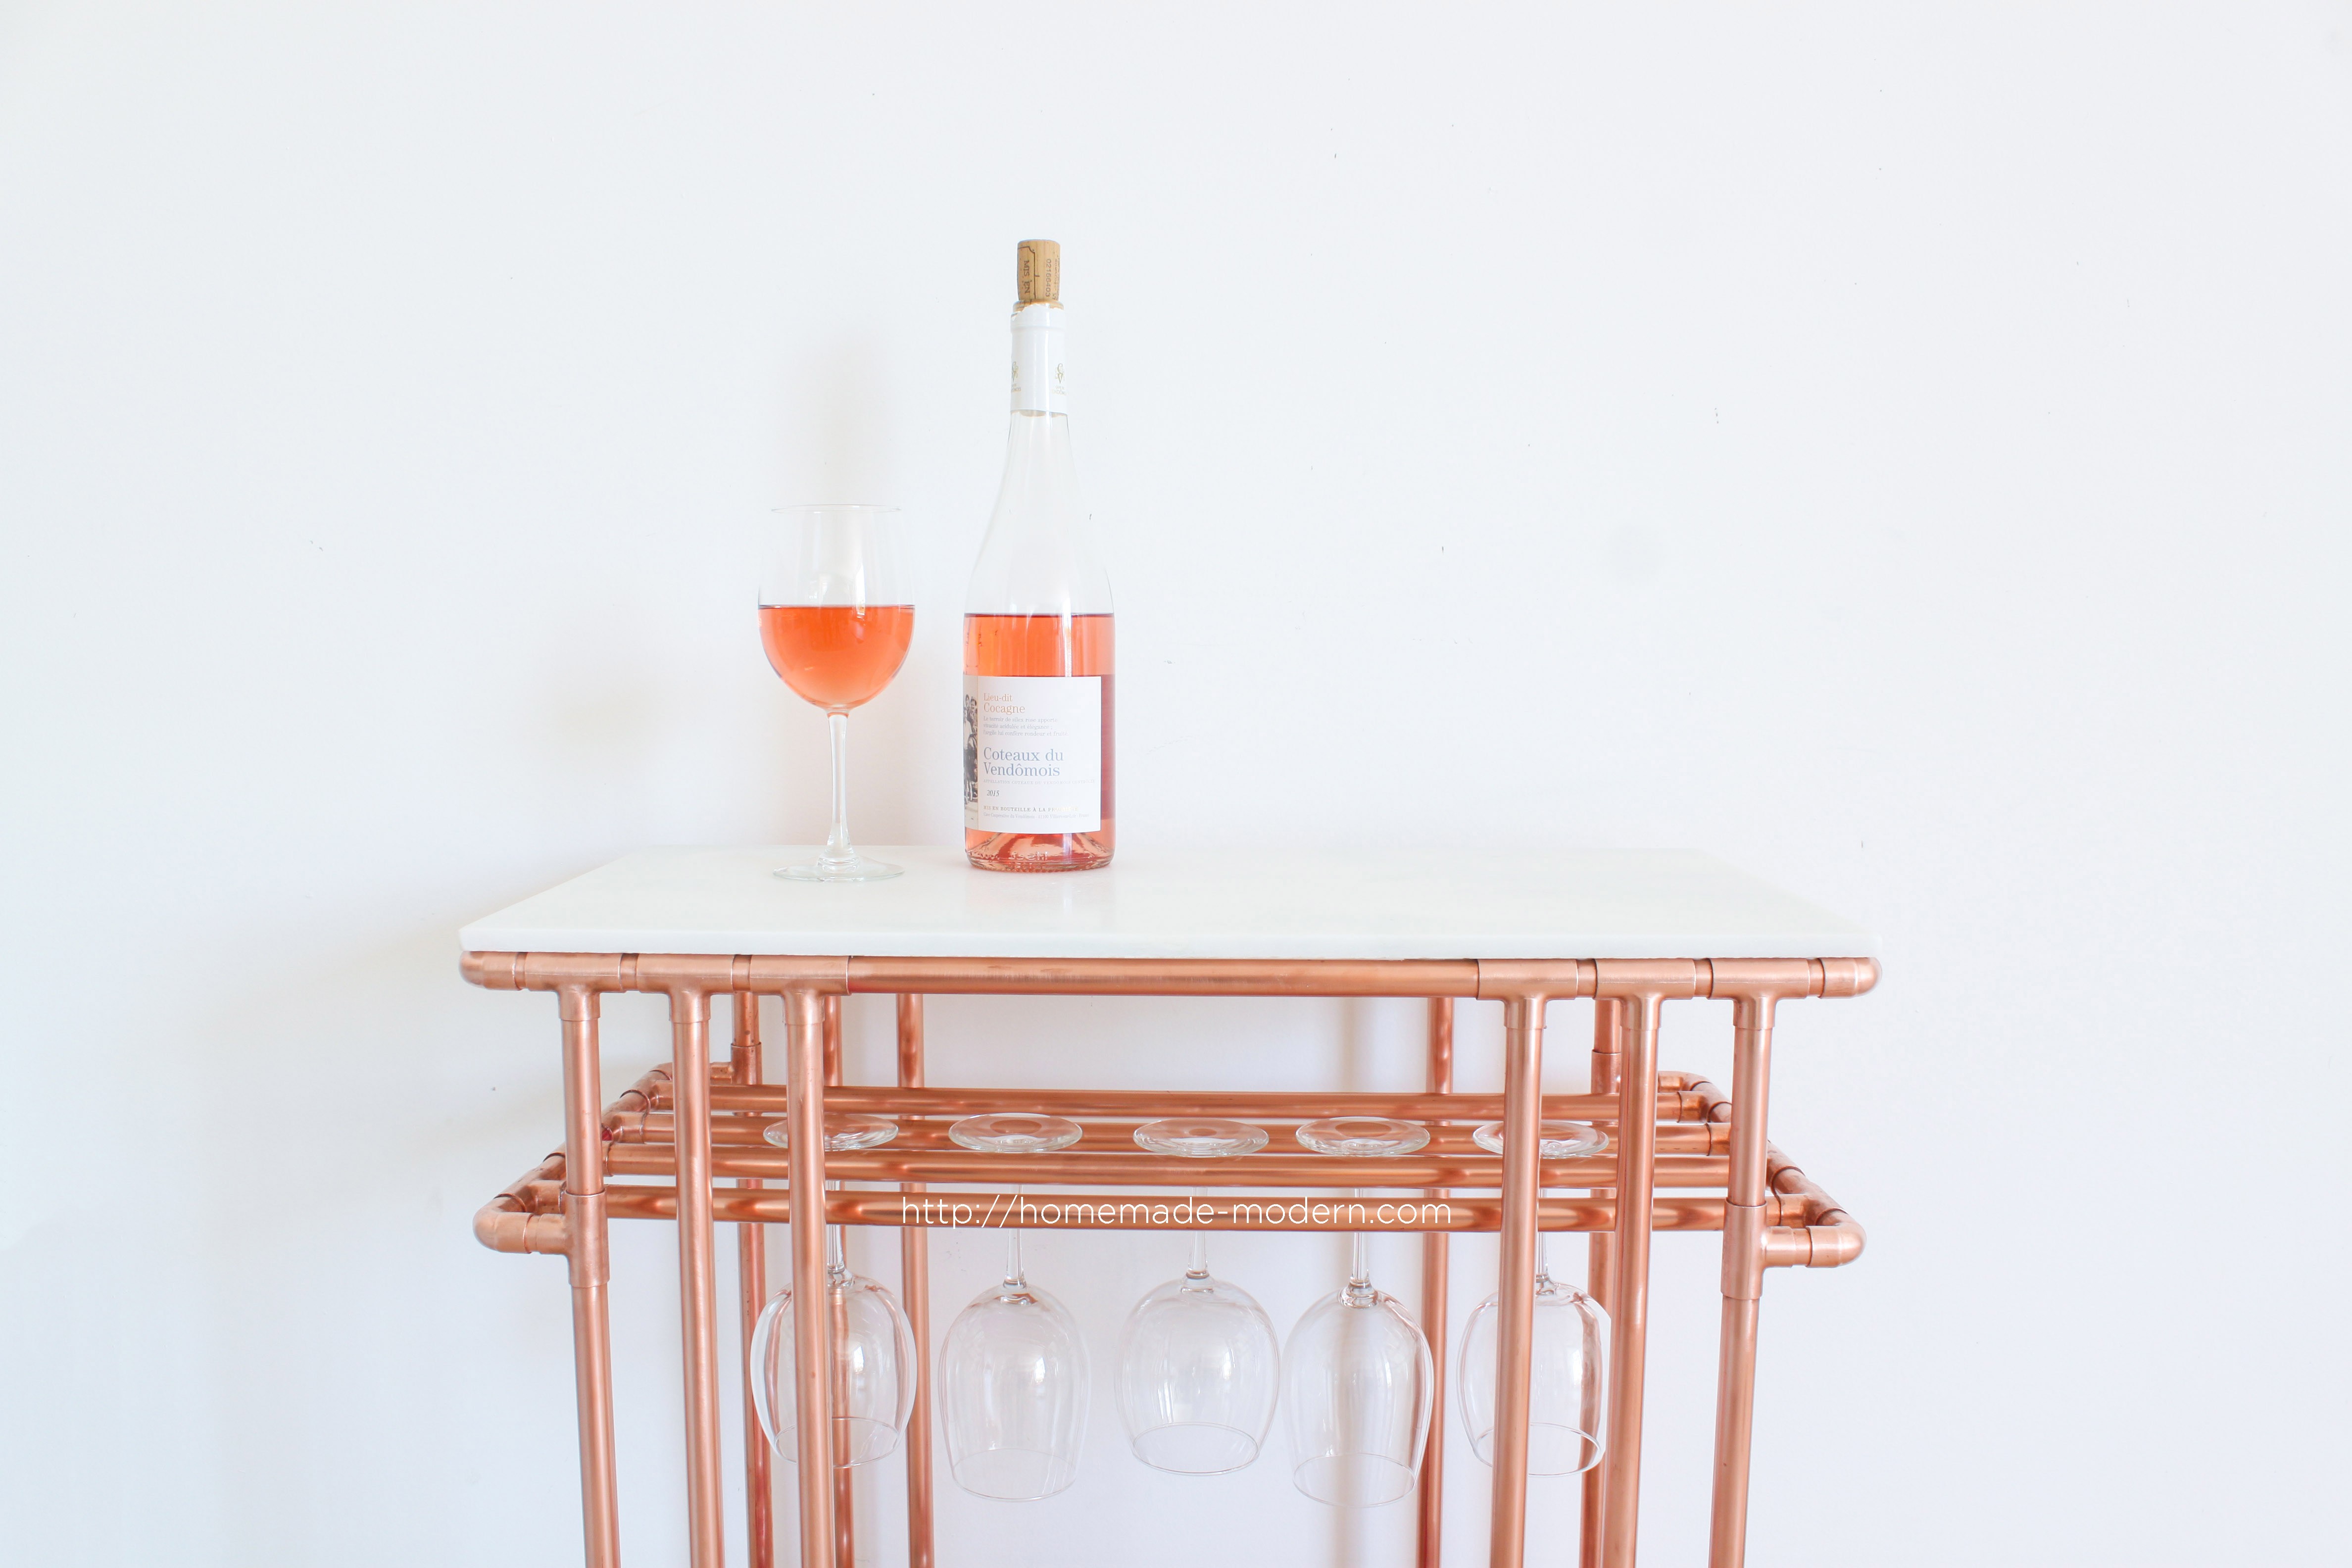 This DIY Copper Wine Bar is made entirely out of material from The Home Depot. Full instructions can be found at HomeMade-Modern.com